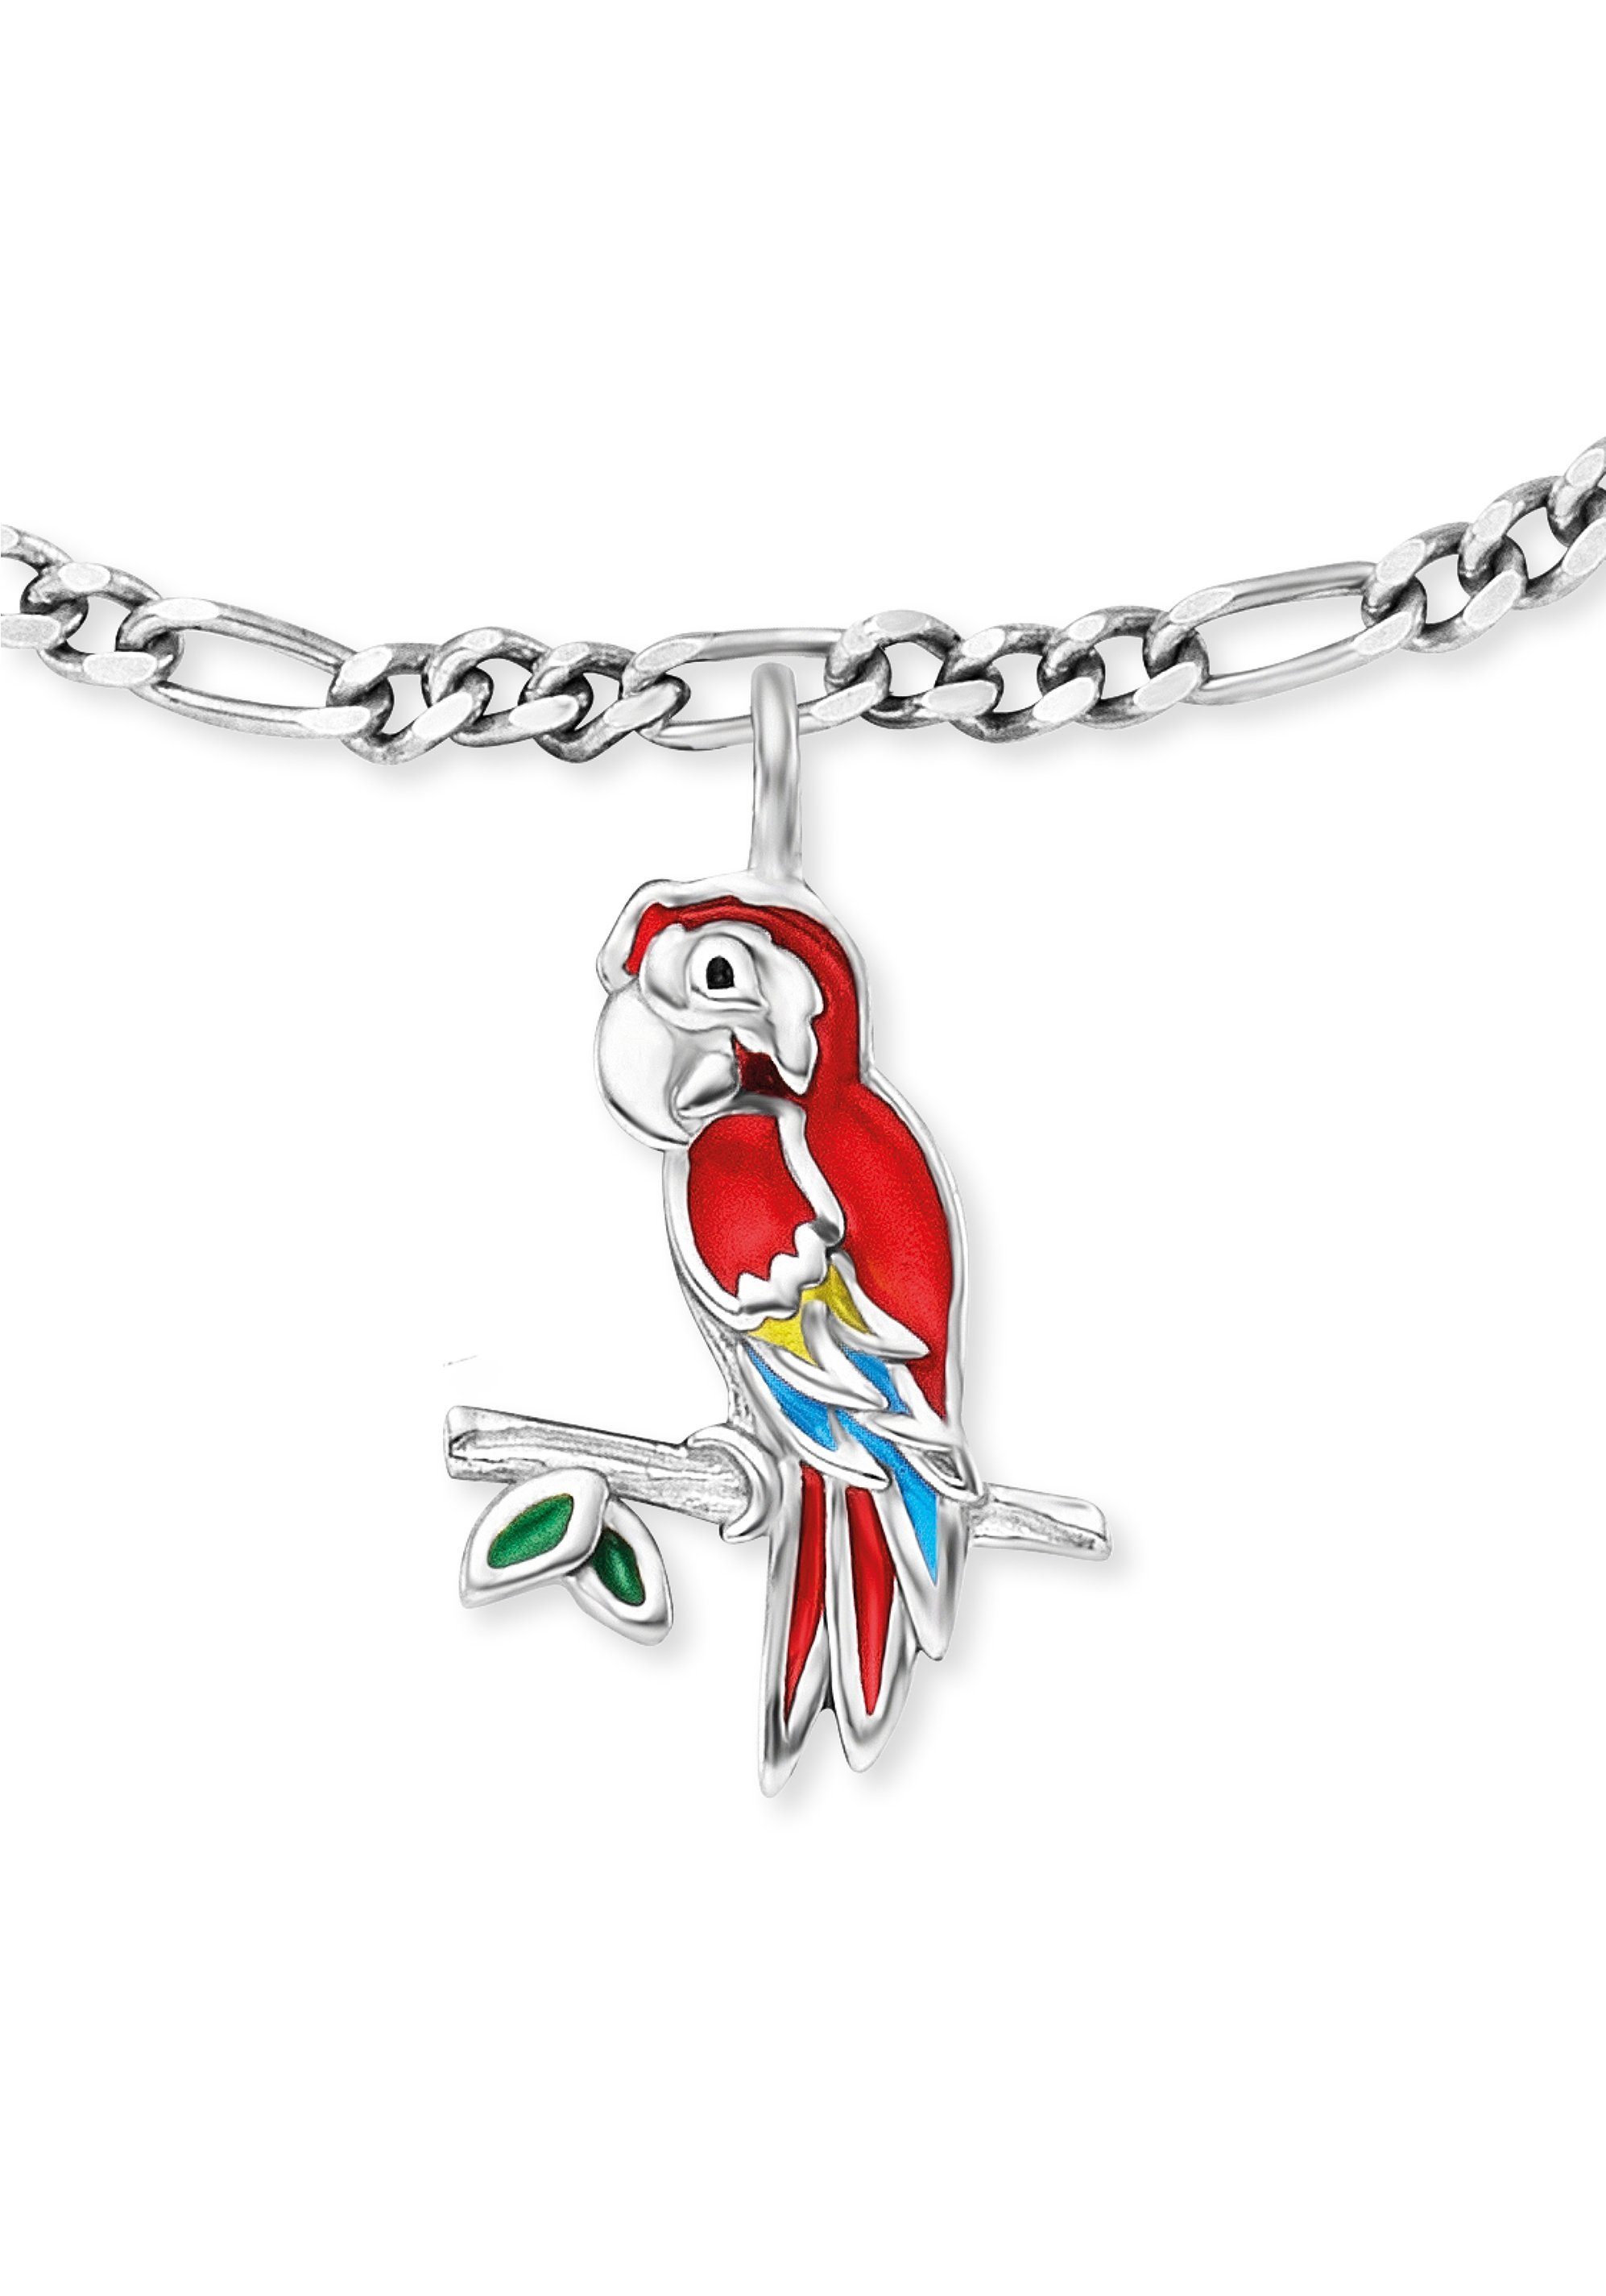 Herzengel Armband Papagei, HEB-PARROT, Emaille mit